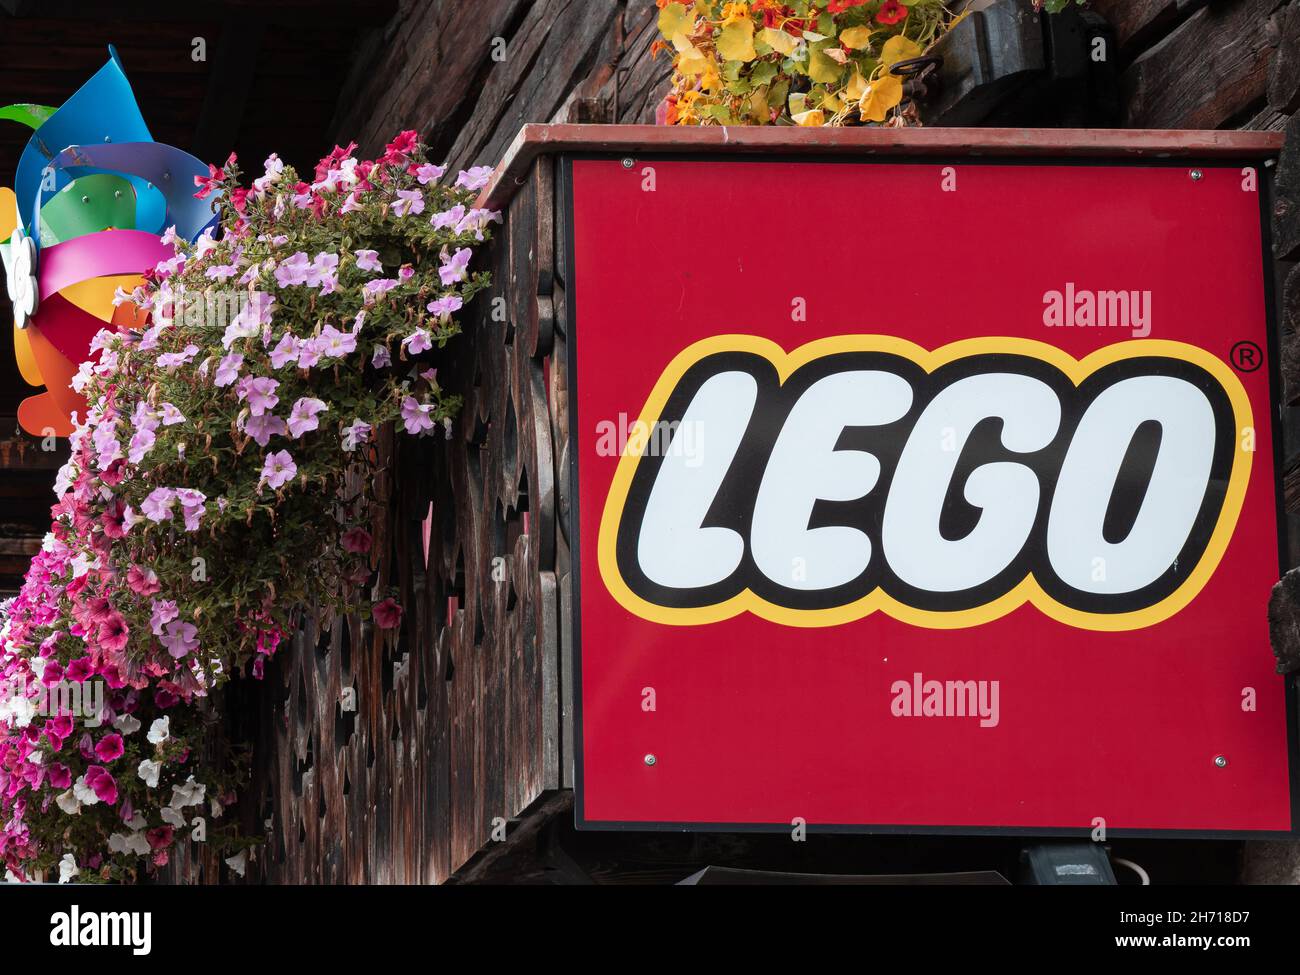 Livigno, Italy - September 29, 2021: A store of Lego, a line of plastic construction toys that are manufactured by The Lego Group, a privately held co Stock Photo